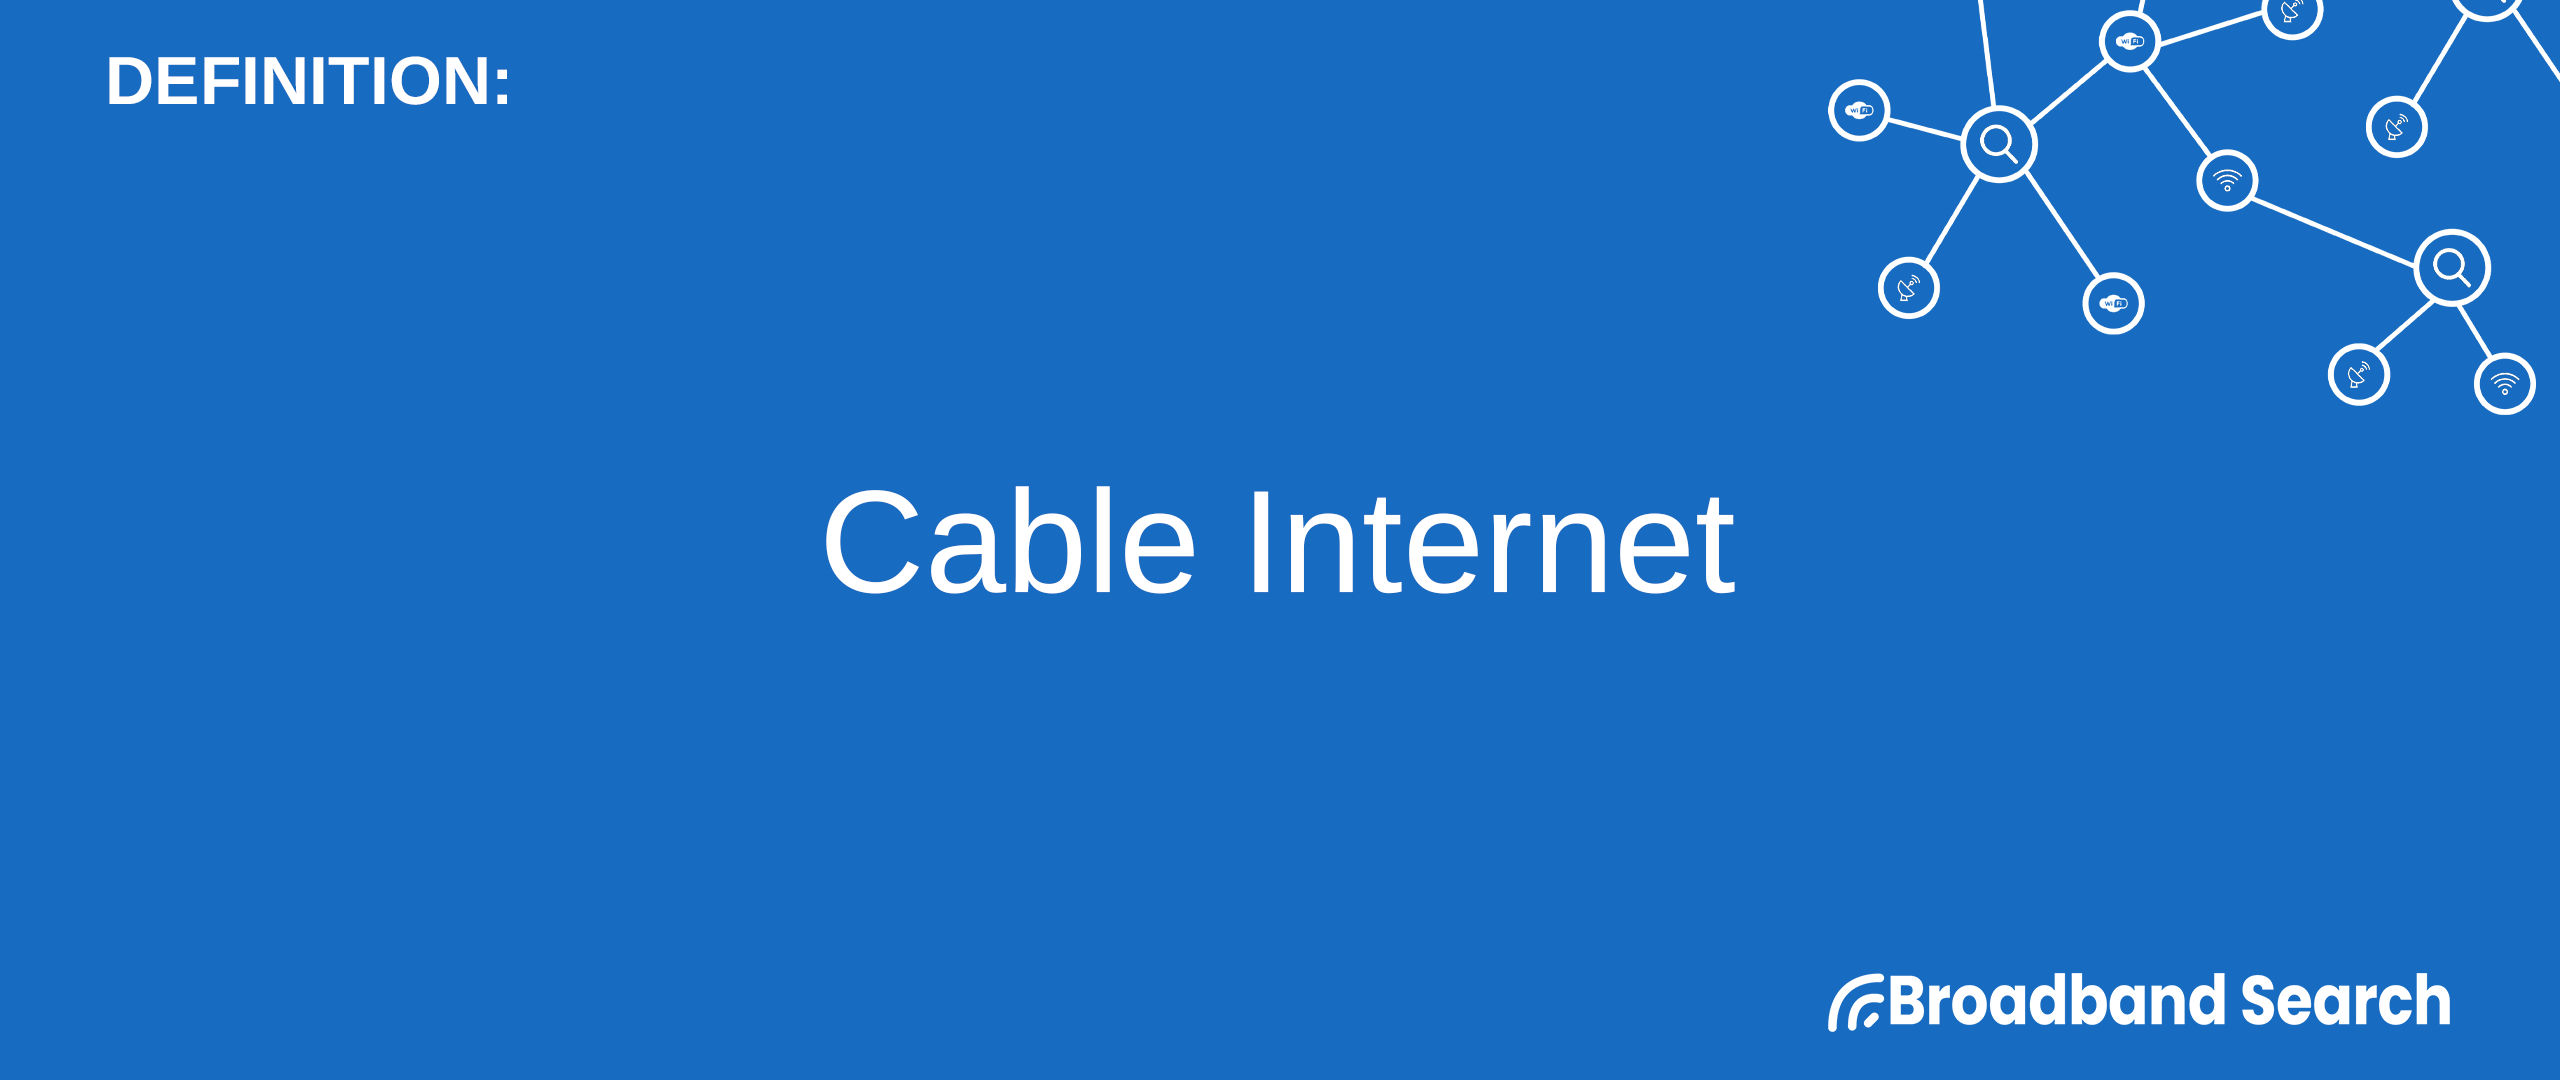 What is Cable Internet? How Cable Internet Works